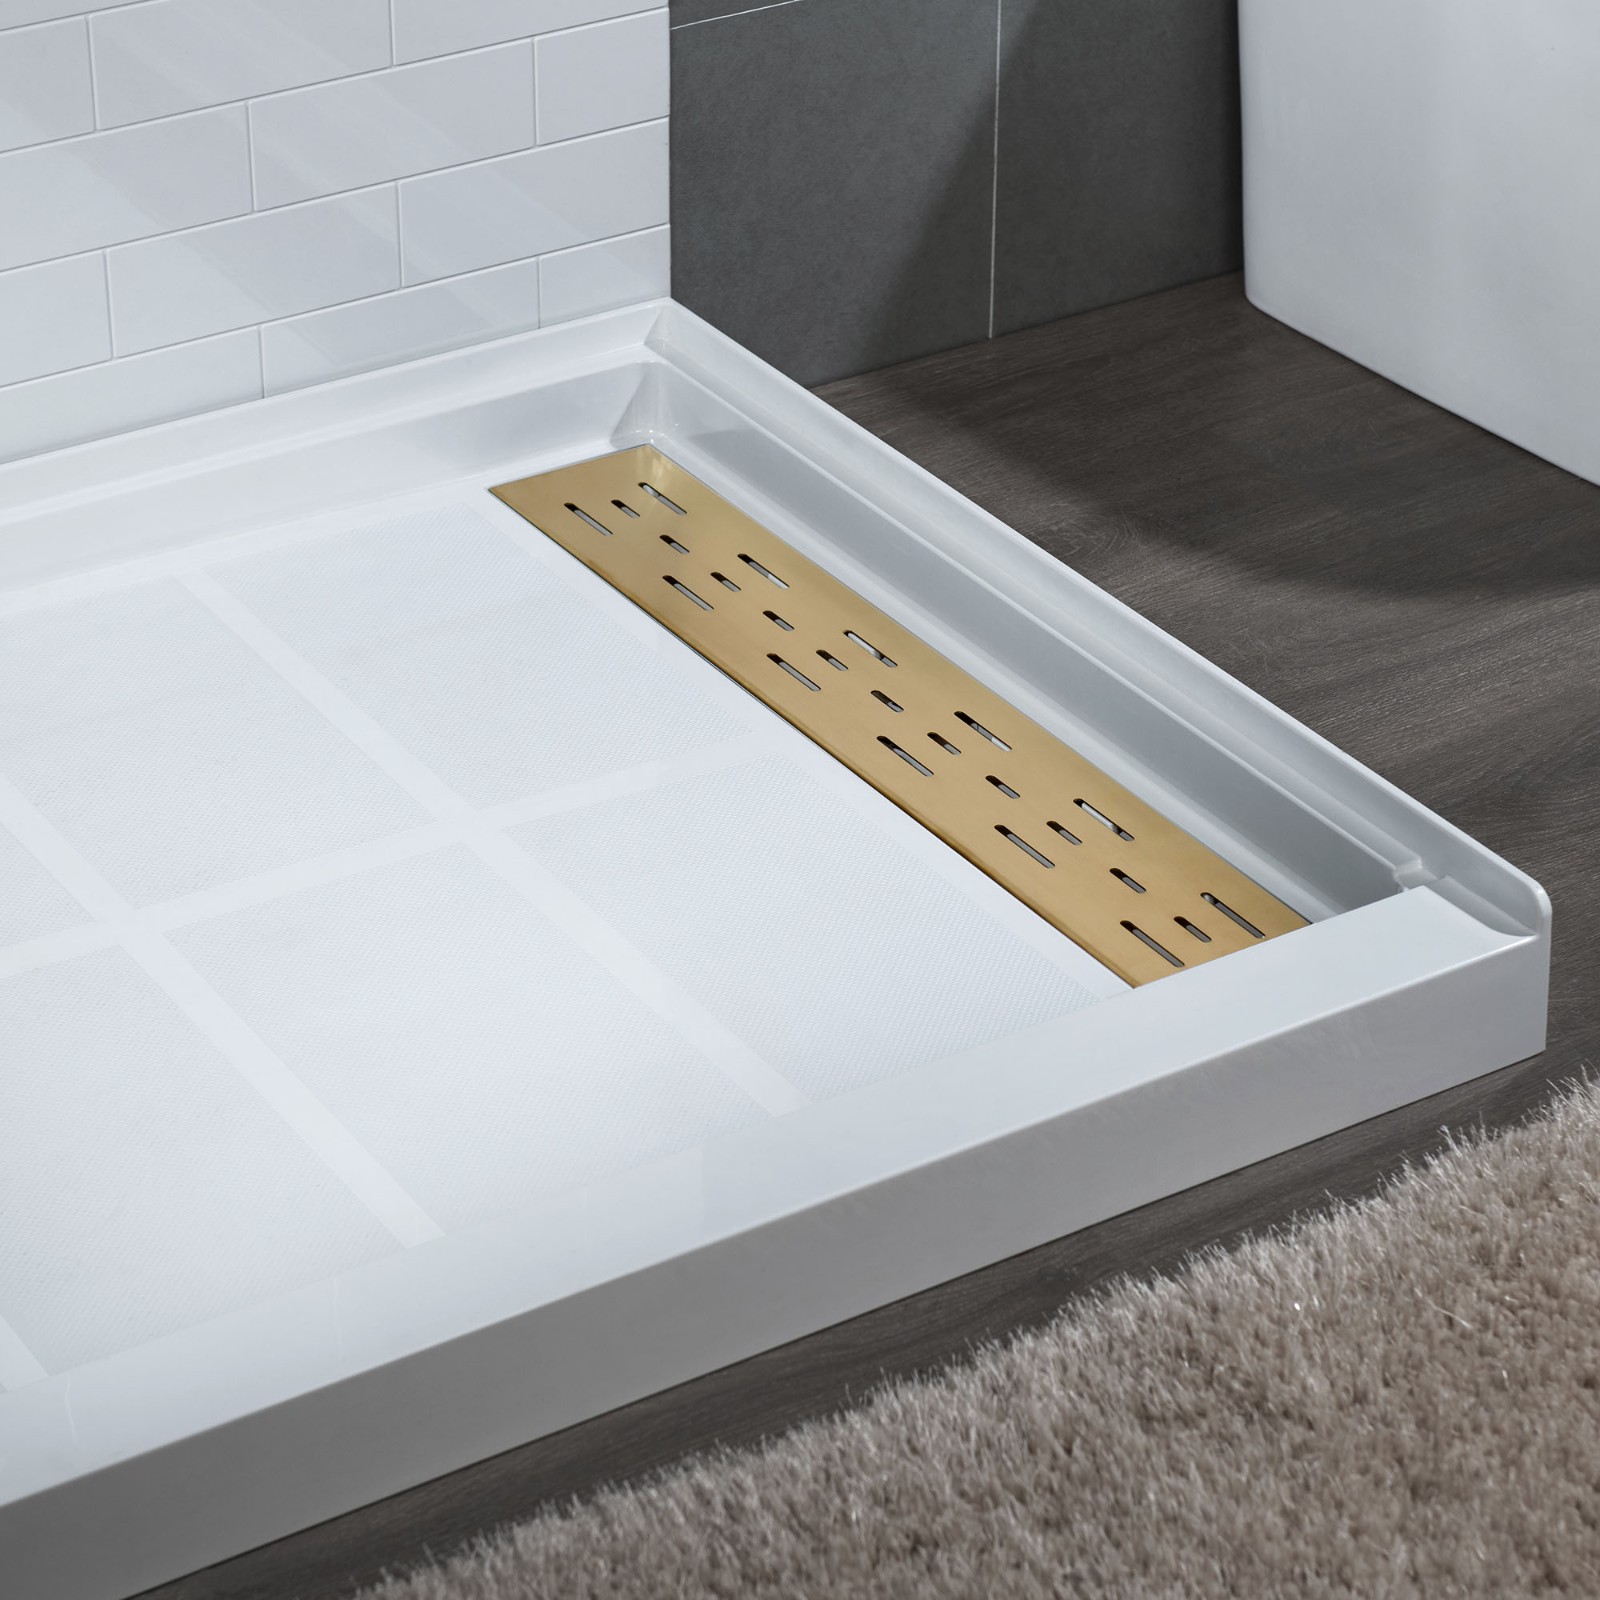  WOODBRIDGE SBR4832-1000R-BG SolidSurface Shower Base with Recessed Trench Side Including Brushed Gold Linear Cover, 48